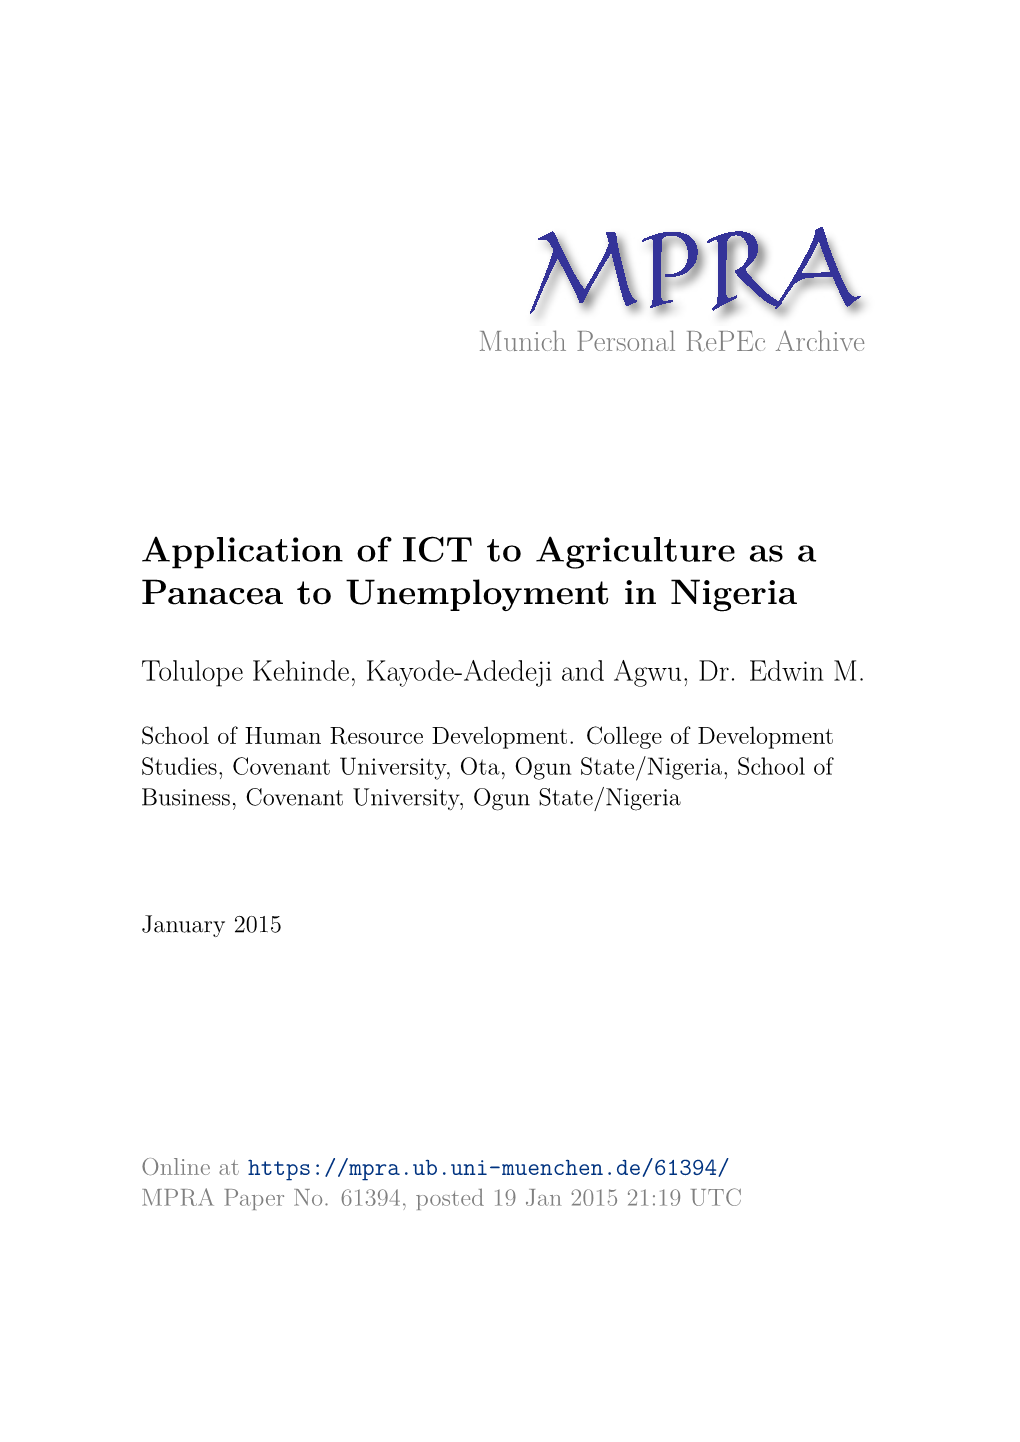 Application of ICT to Agriculture As a Panacea to Unemployment in Nigeria